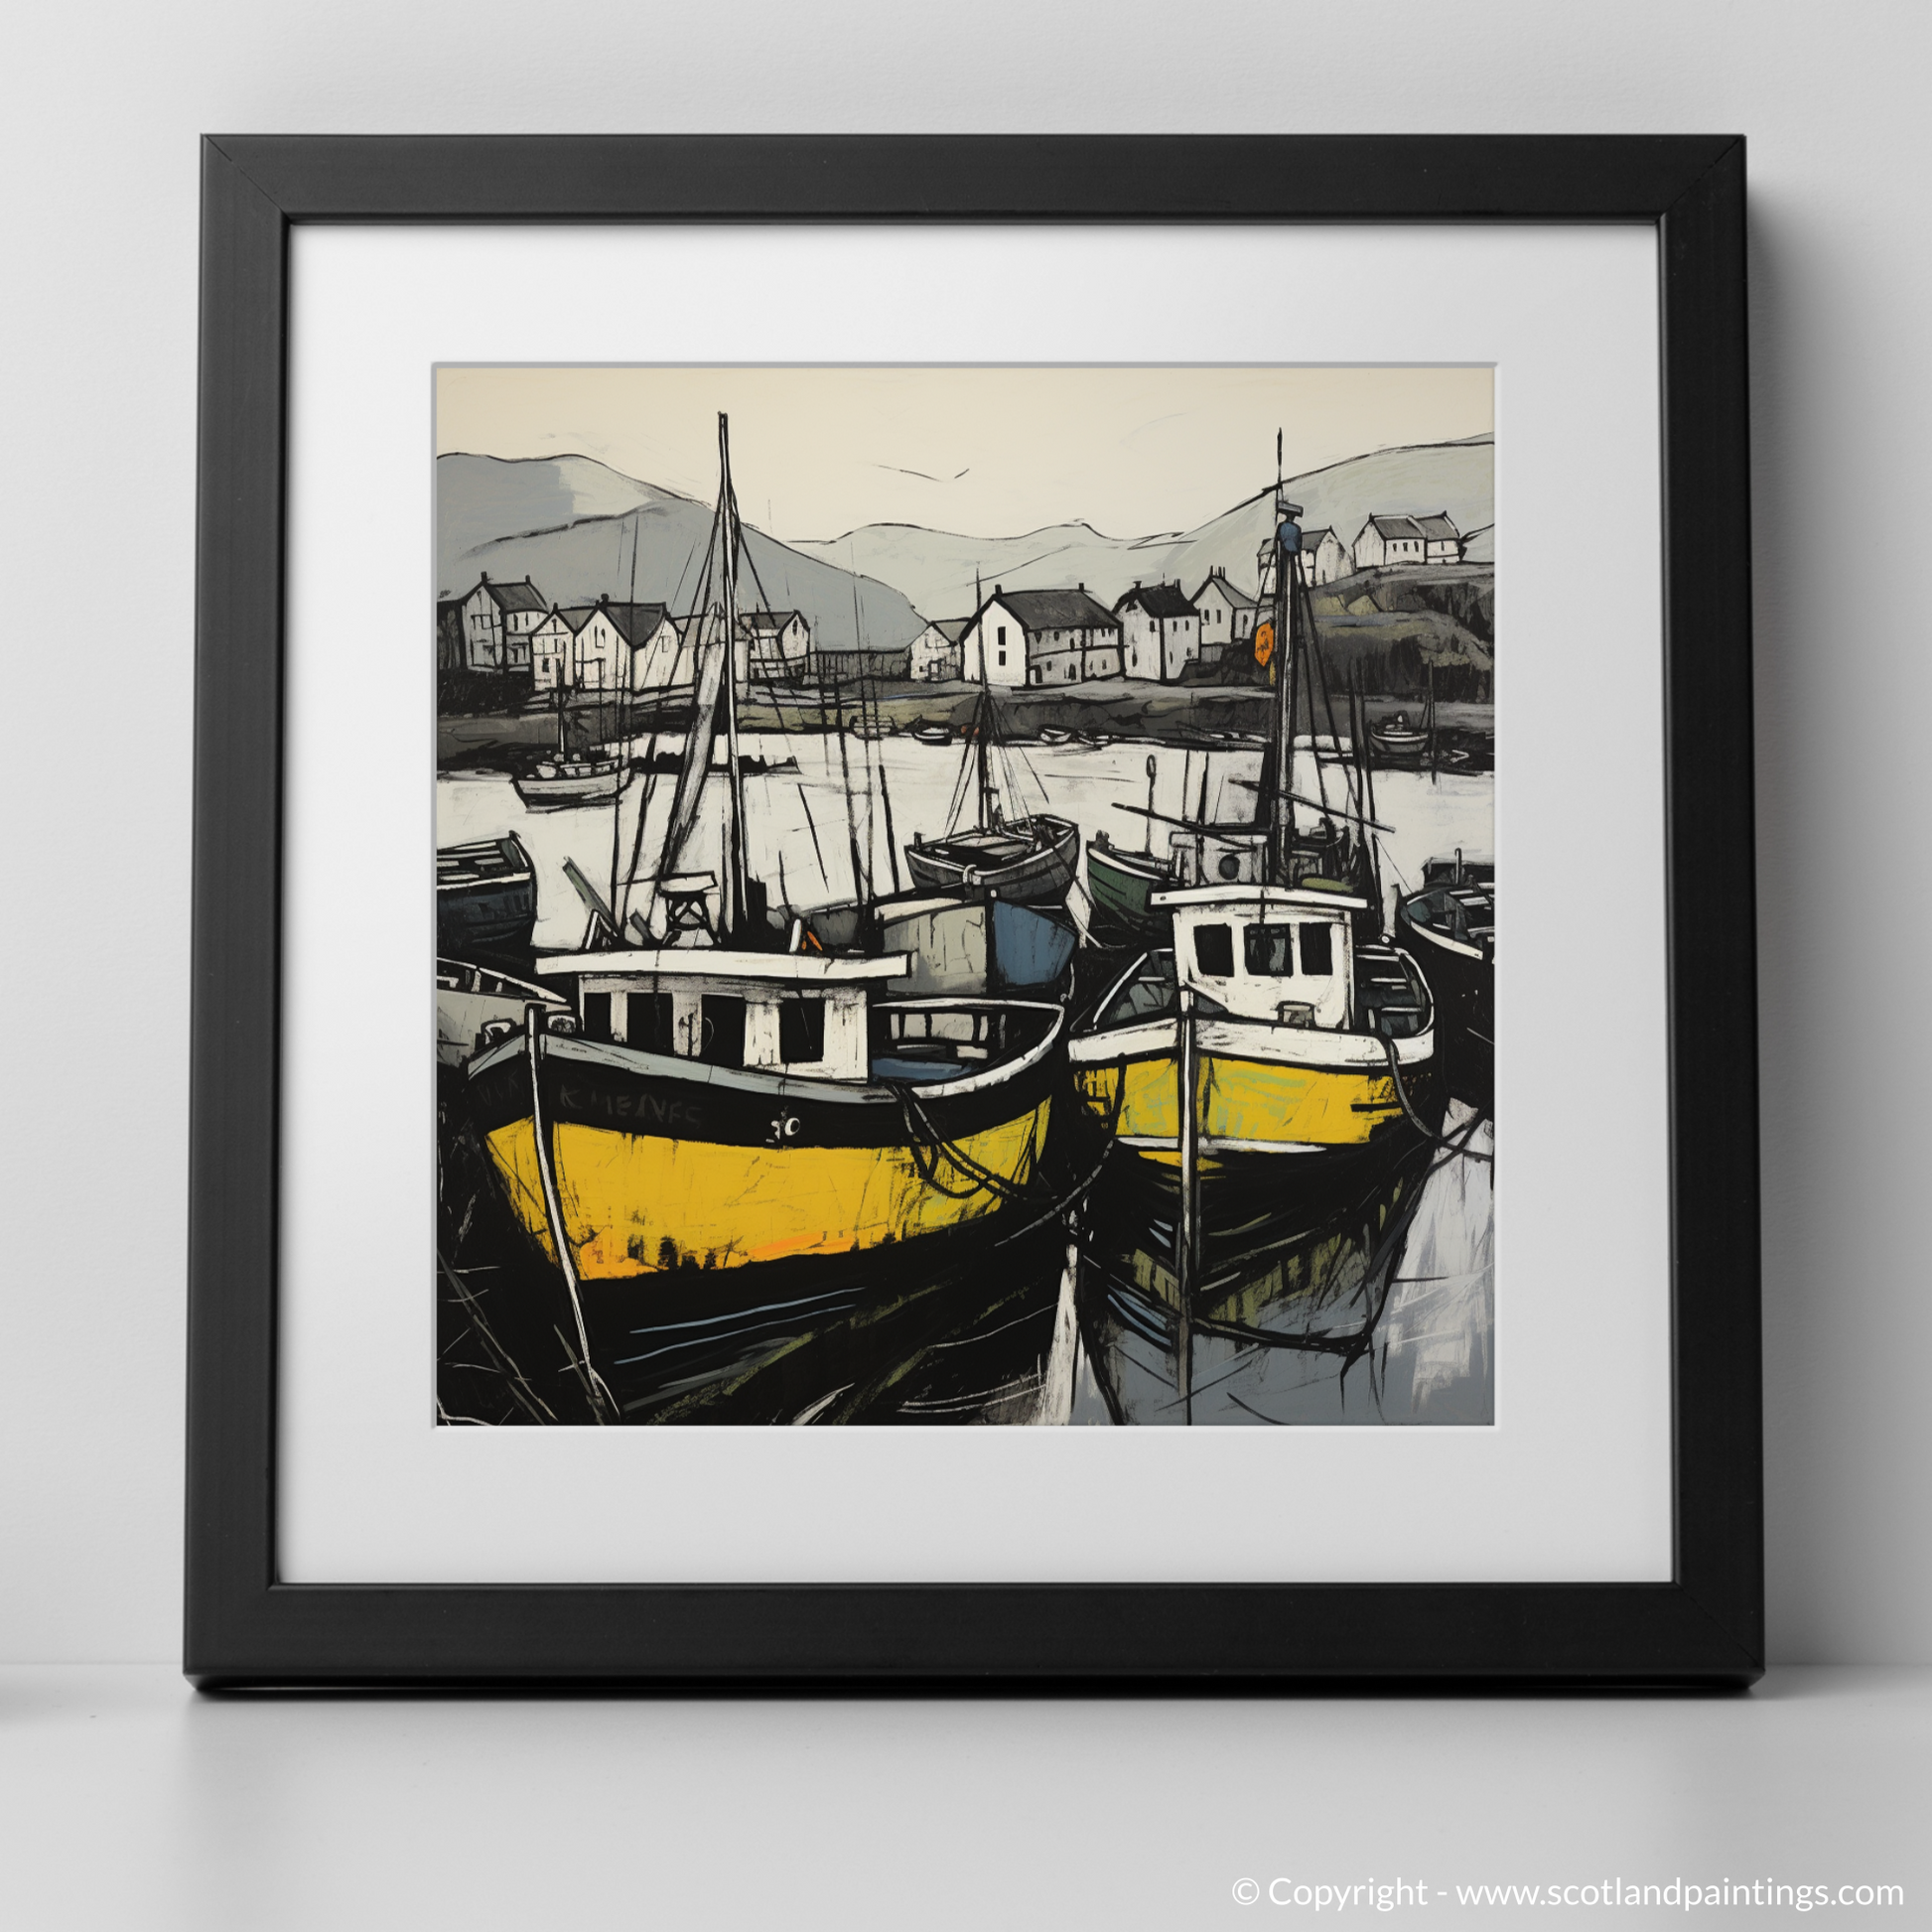 Art Print of Castlebay Harbour, Isle of Barra with a black frame